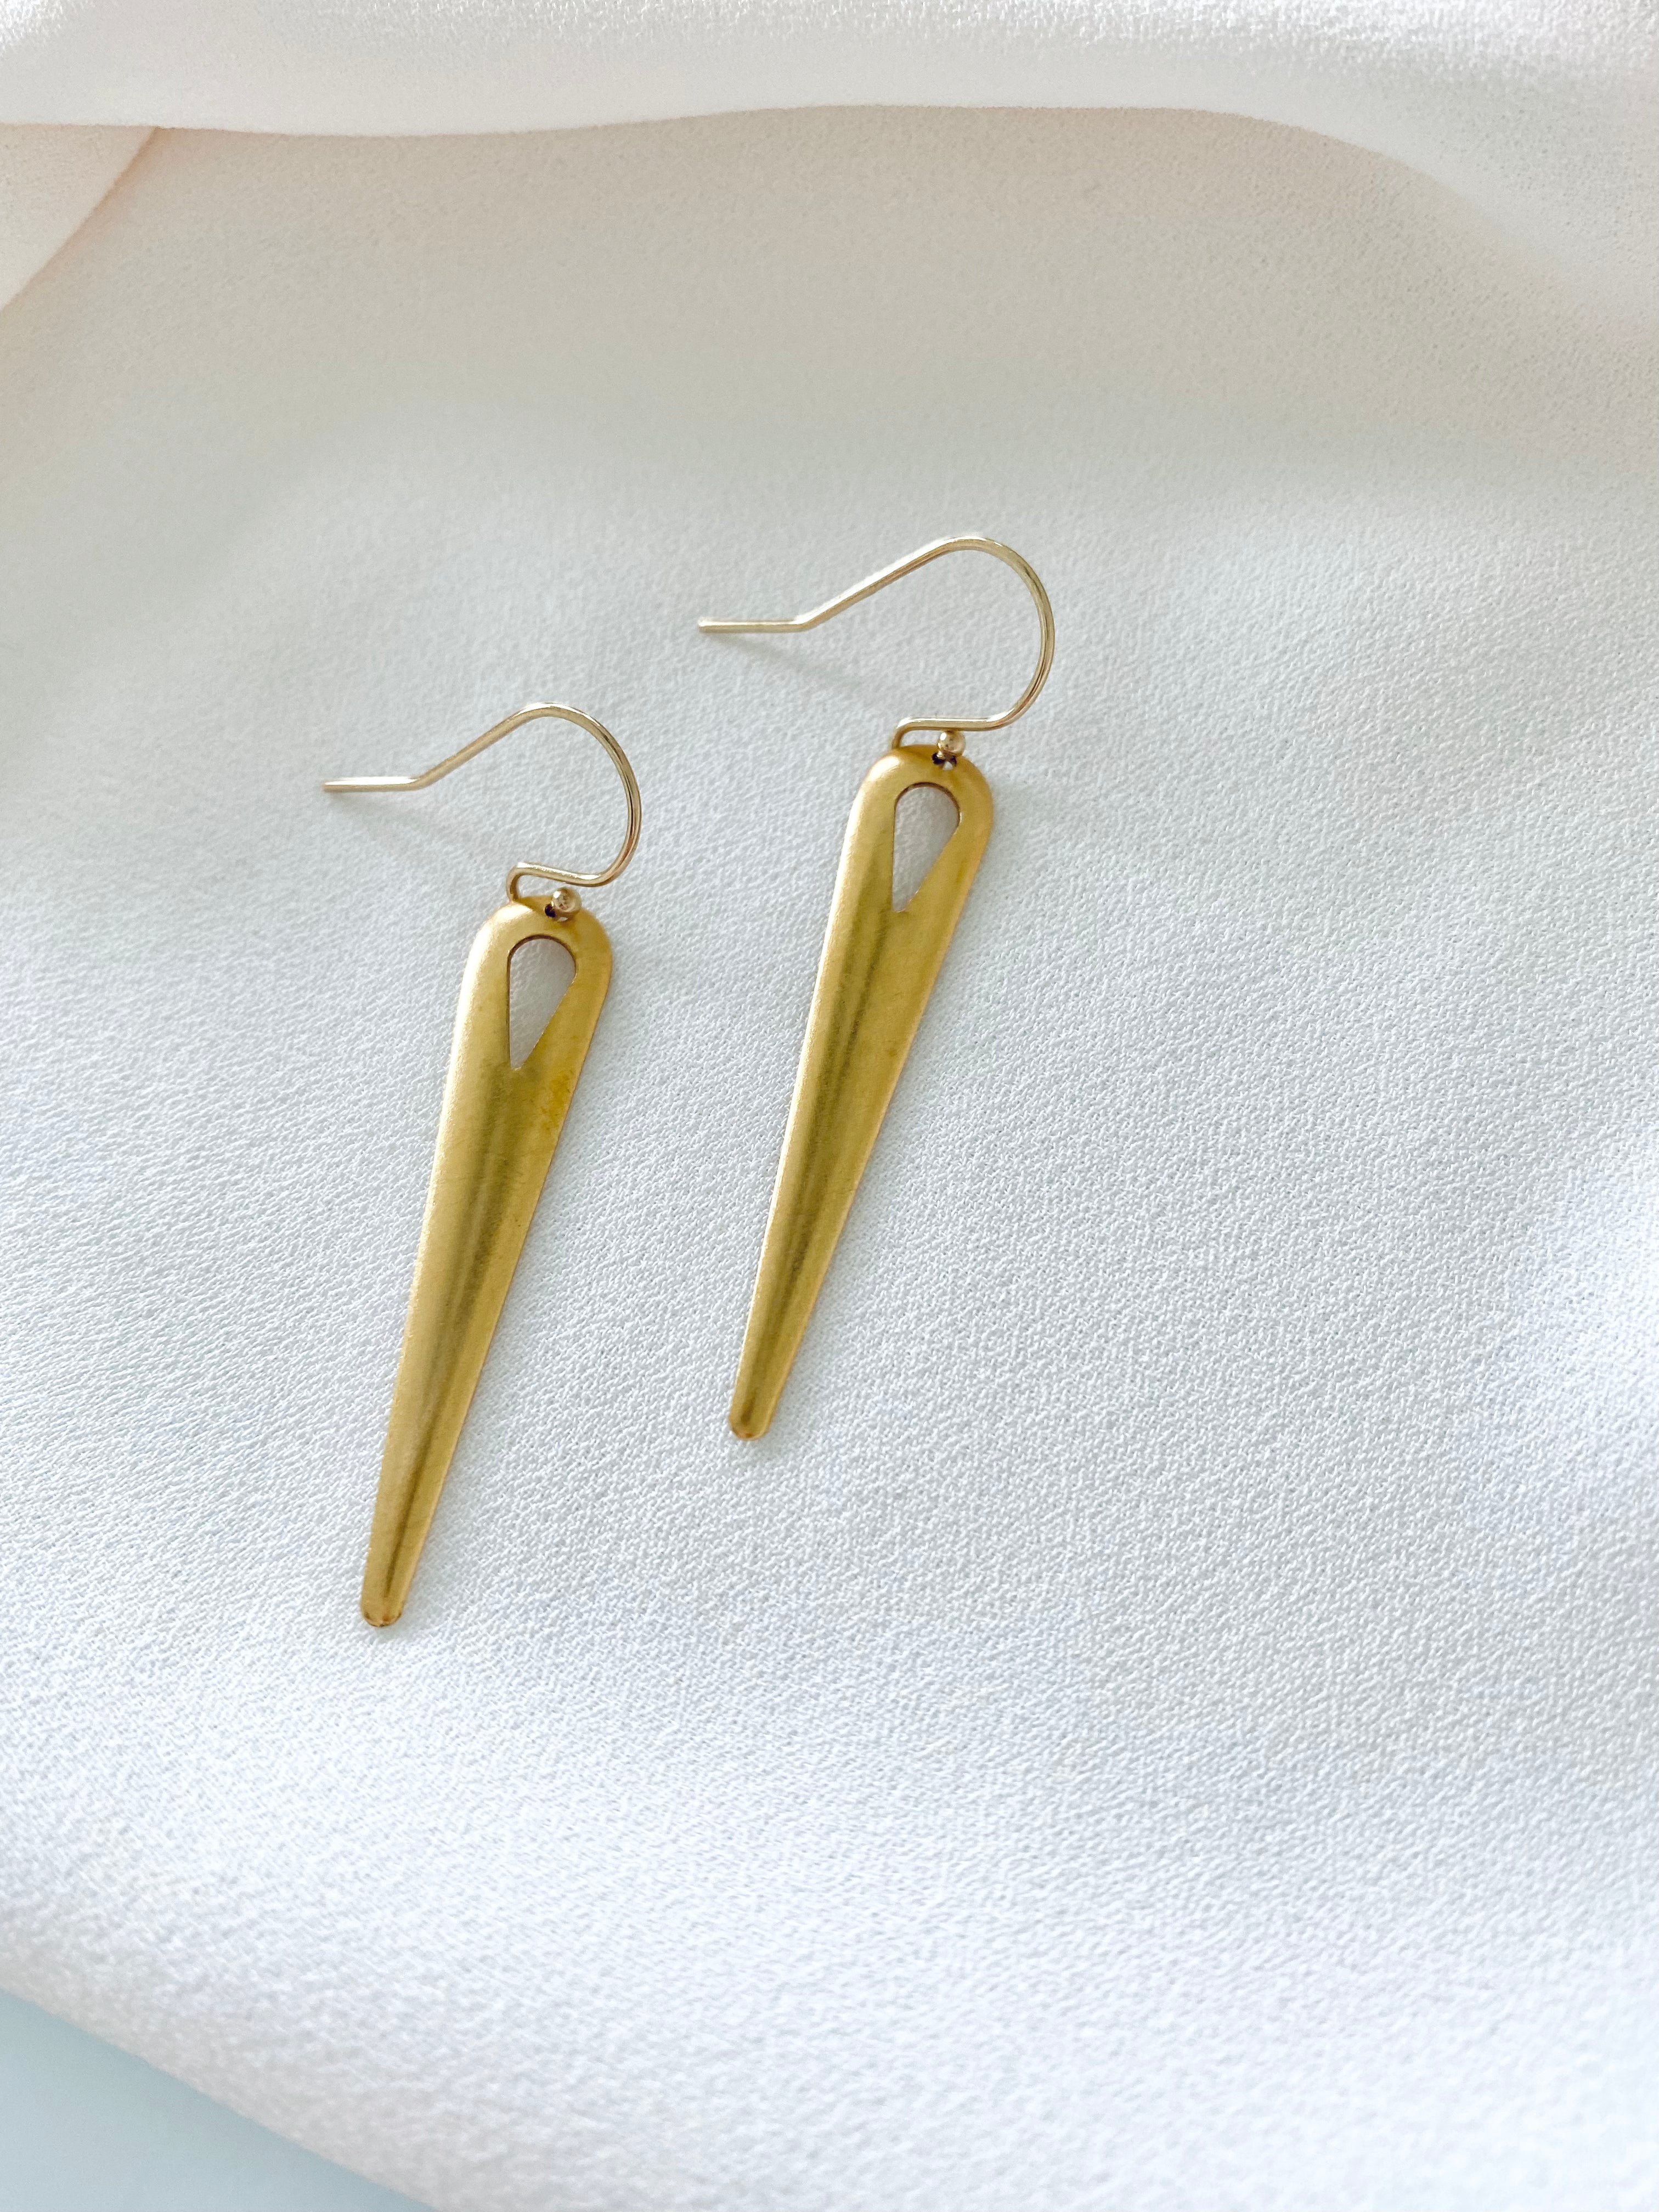 Gold Dangle Drop Earrings - Gold Filled Hooks - Festival Jewelry - Feather Weight